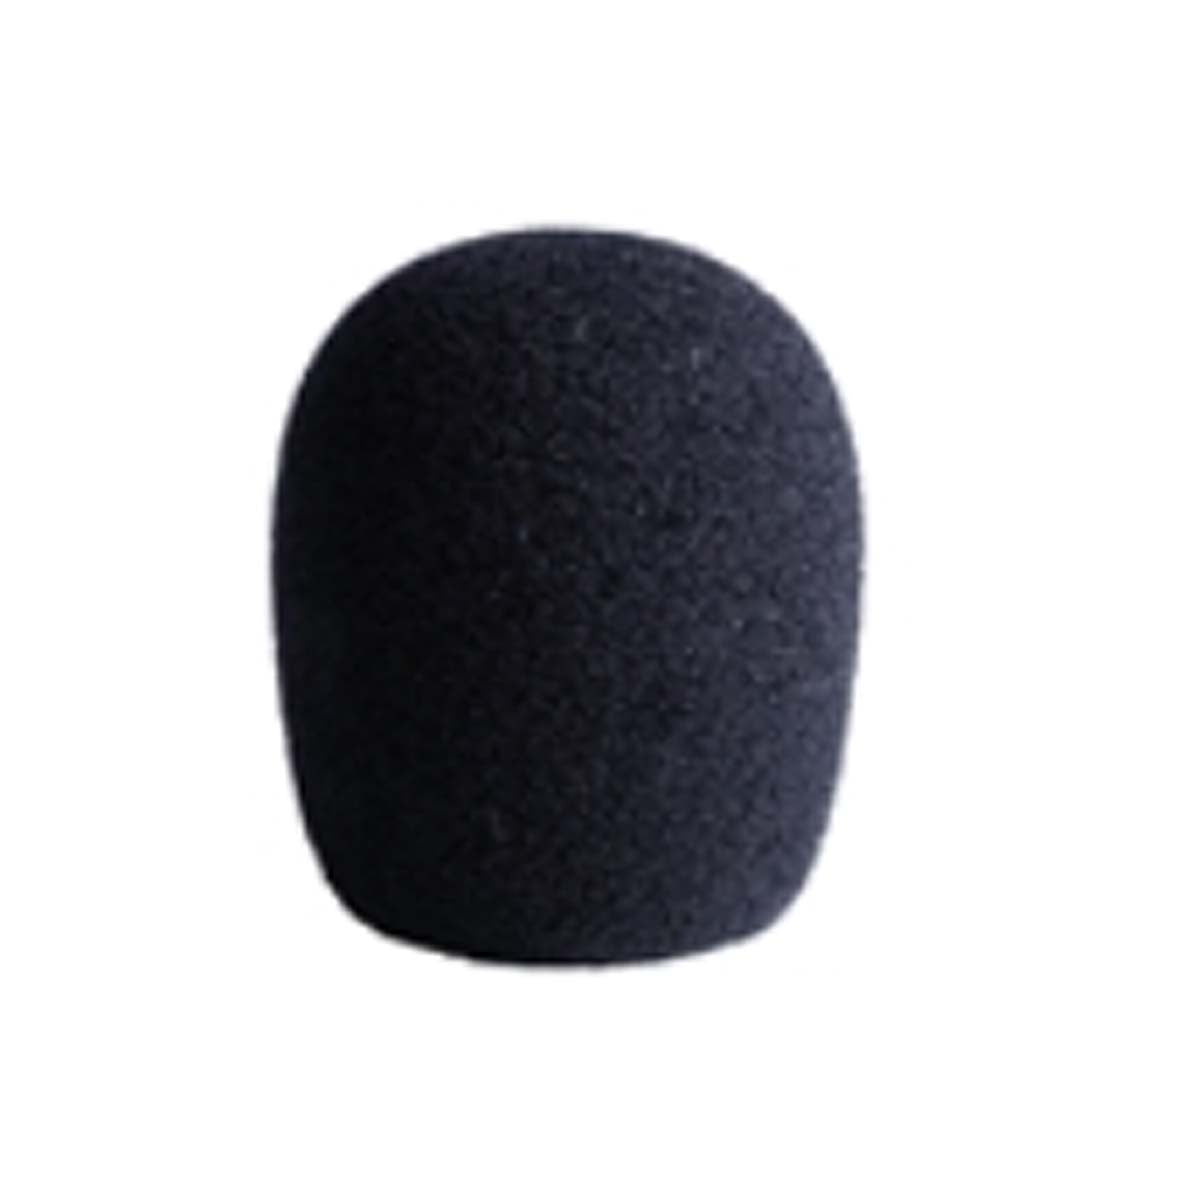 Lewitt Audio LCT 40 WS Windscreen for LCT 140 & LCT 340 Microphones